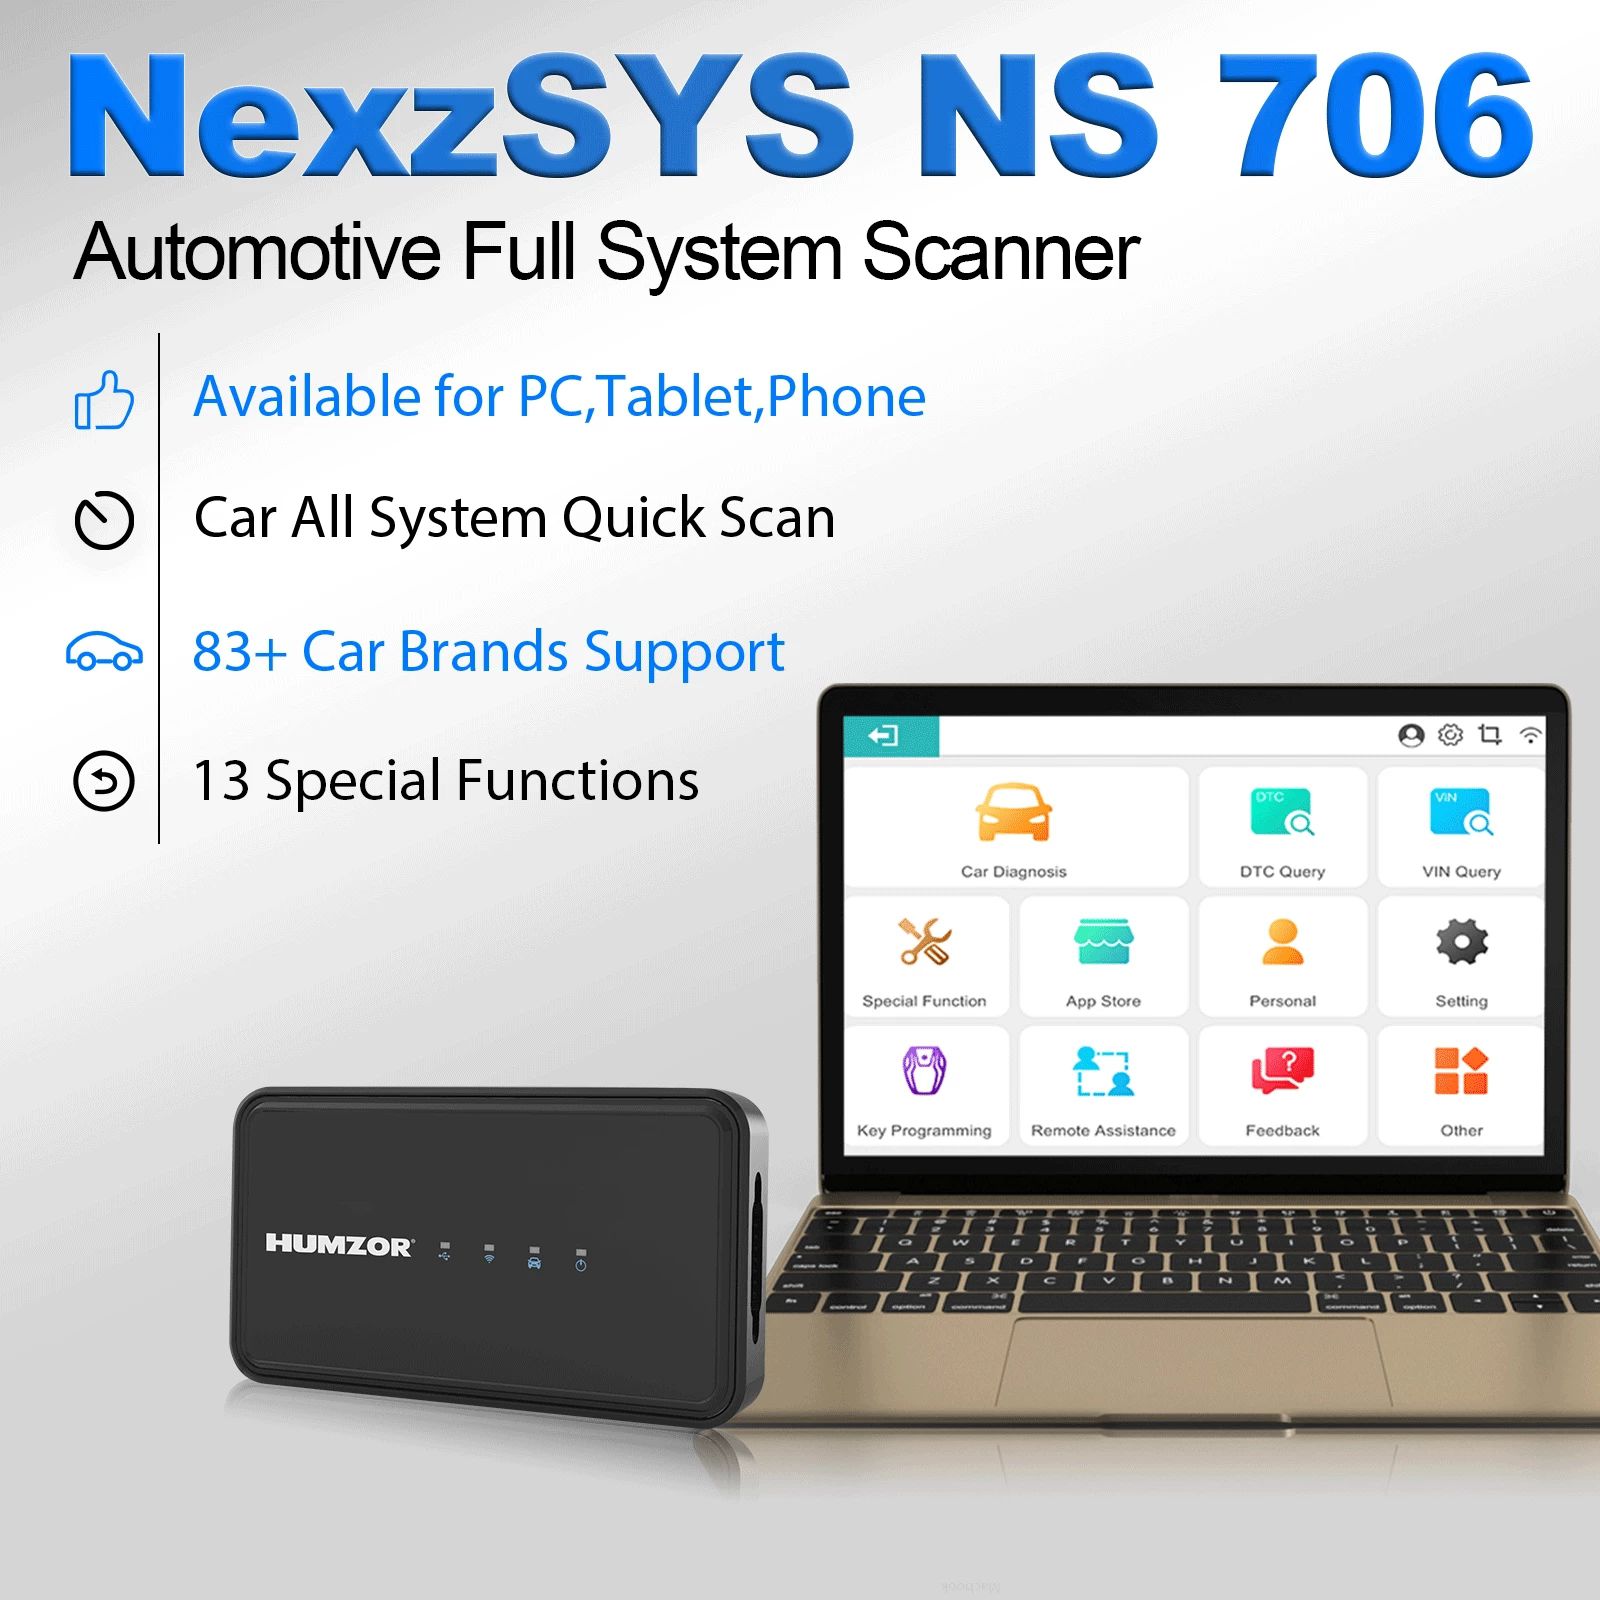 Humzor NS706 Windows Android OBD 2 Car Diagnostic Tool Full System ABS Oil Reset SAS SRS OBD2 Automotive Scanner Free Update